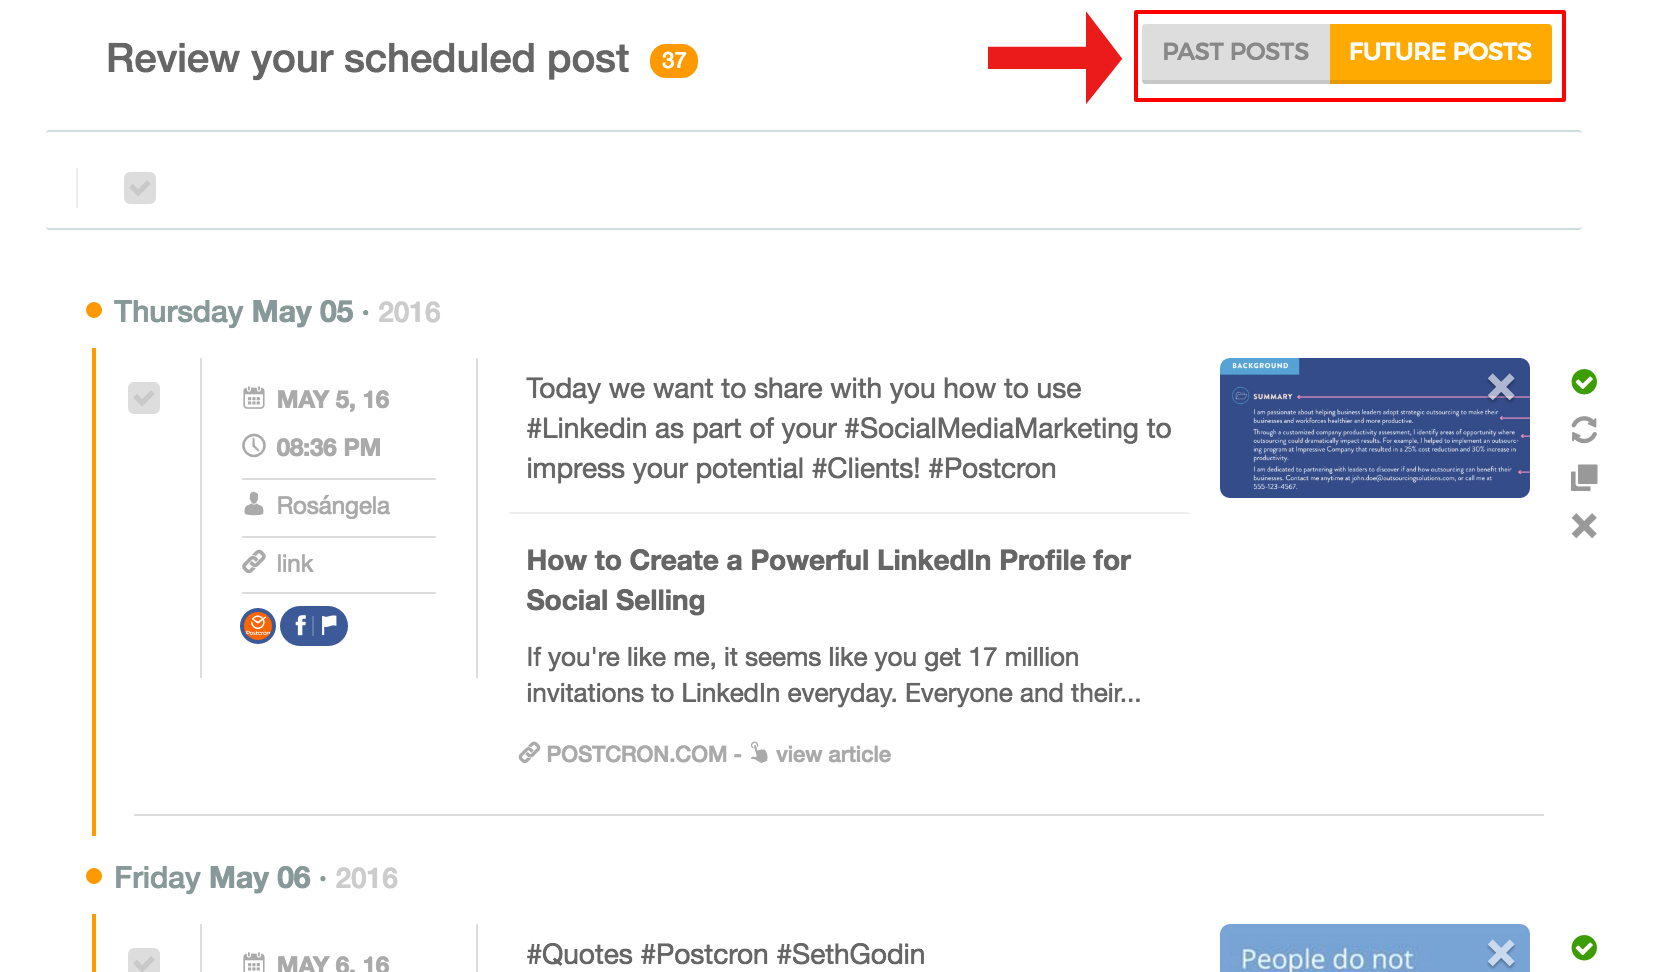 review-scheduled-posts-on-Postcron